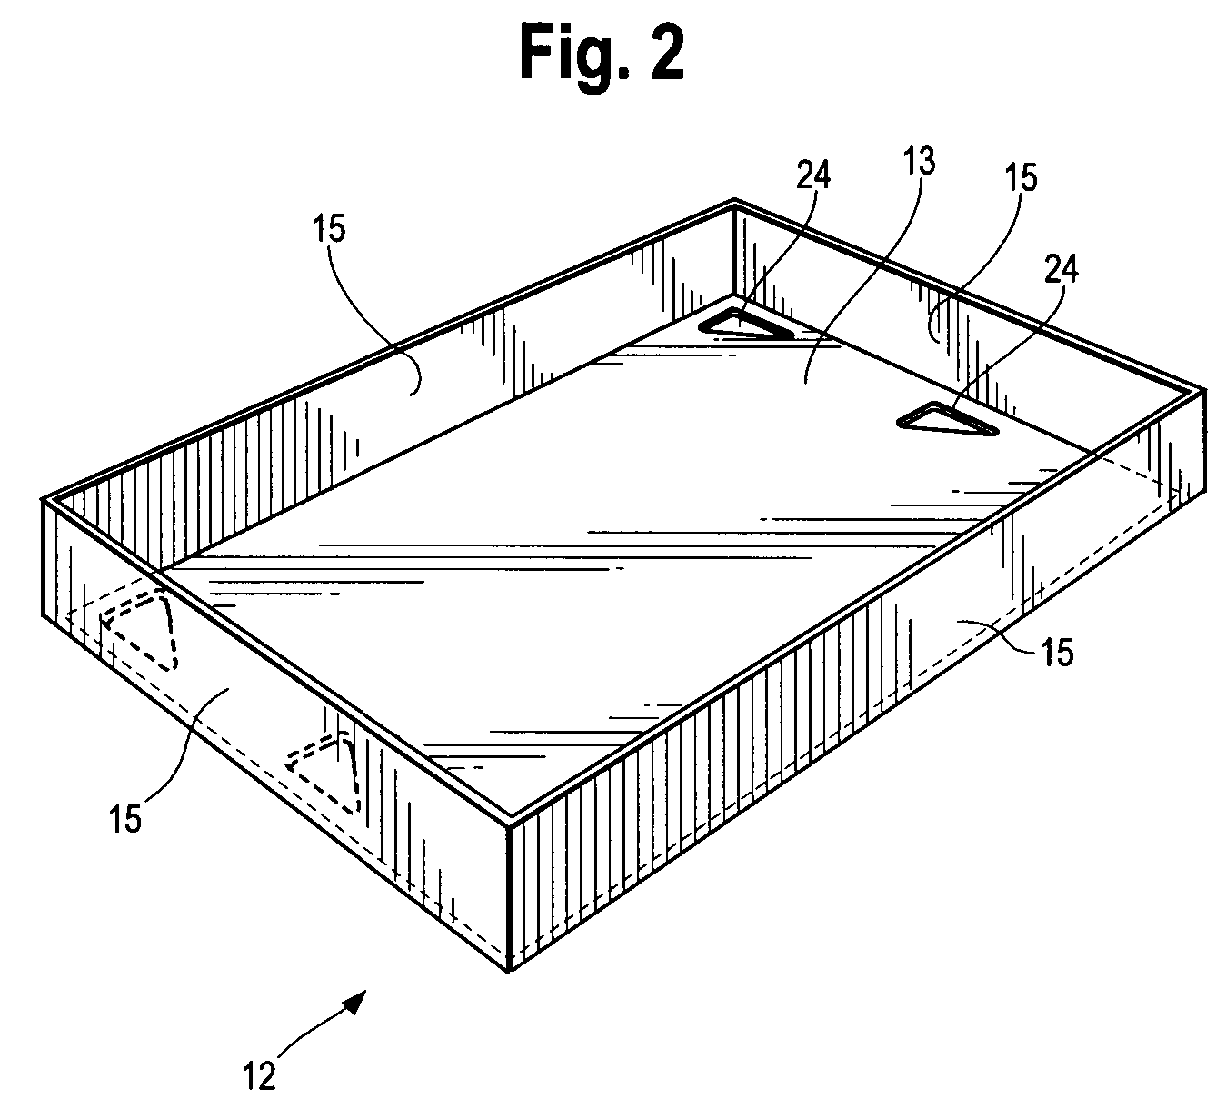 Base for post in post product packaging and display system